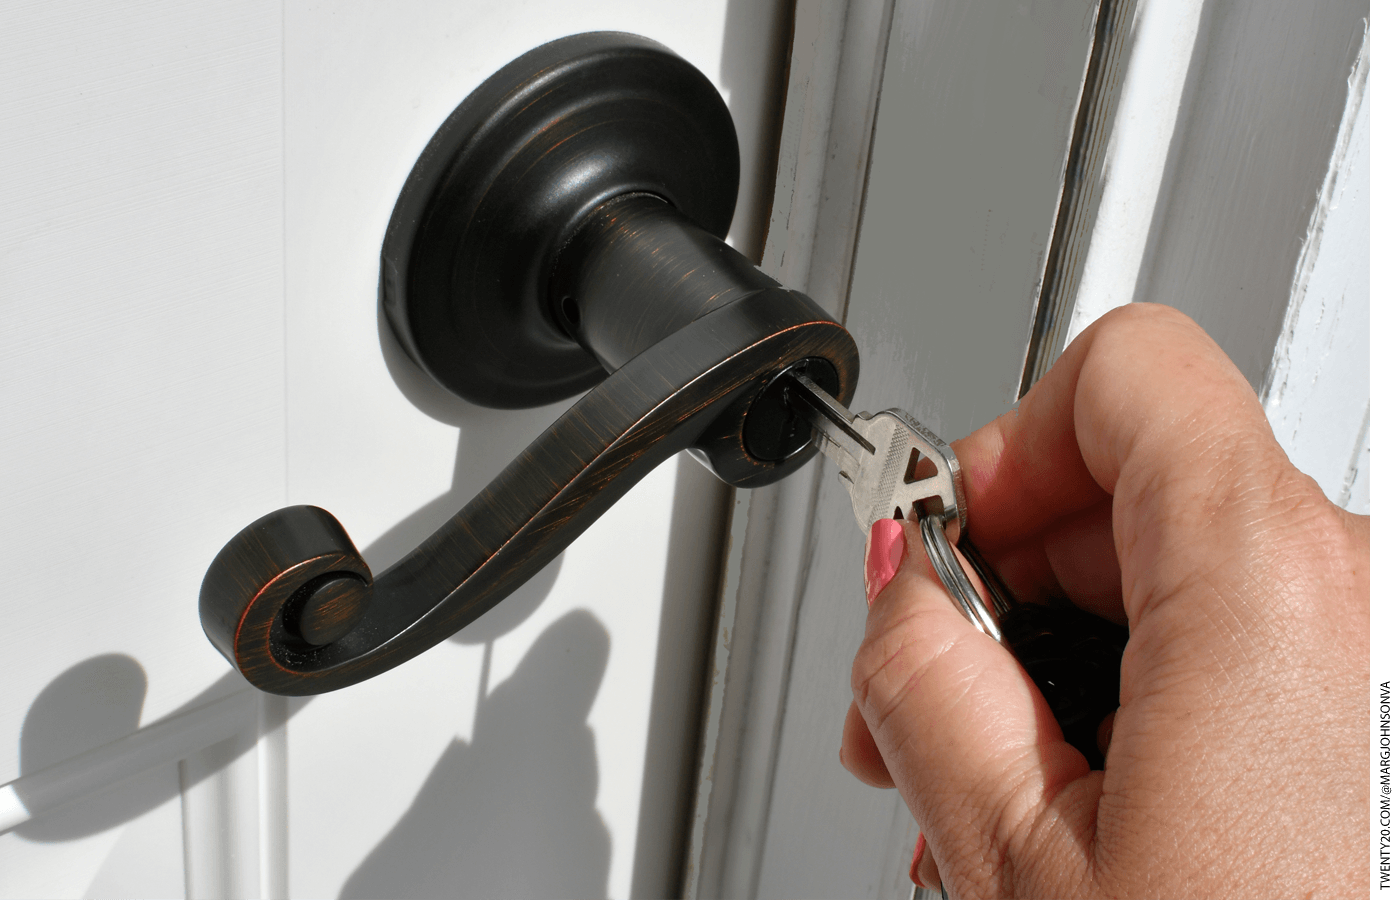 A hand inserting a key into the lock of a doornob